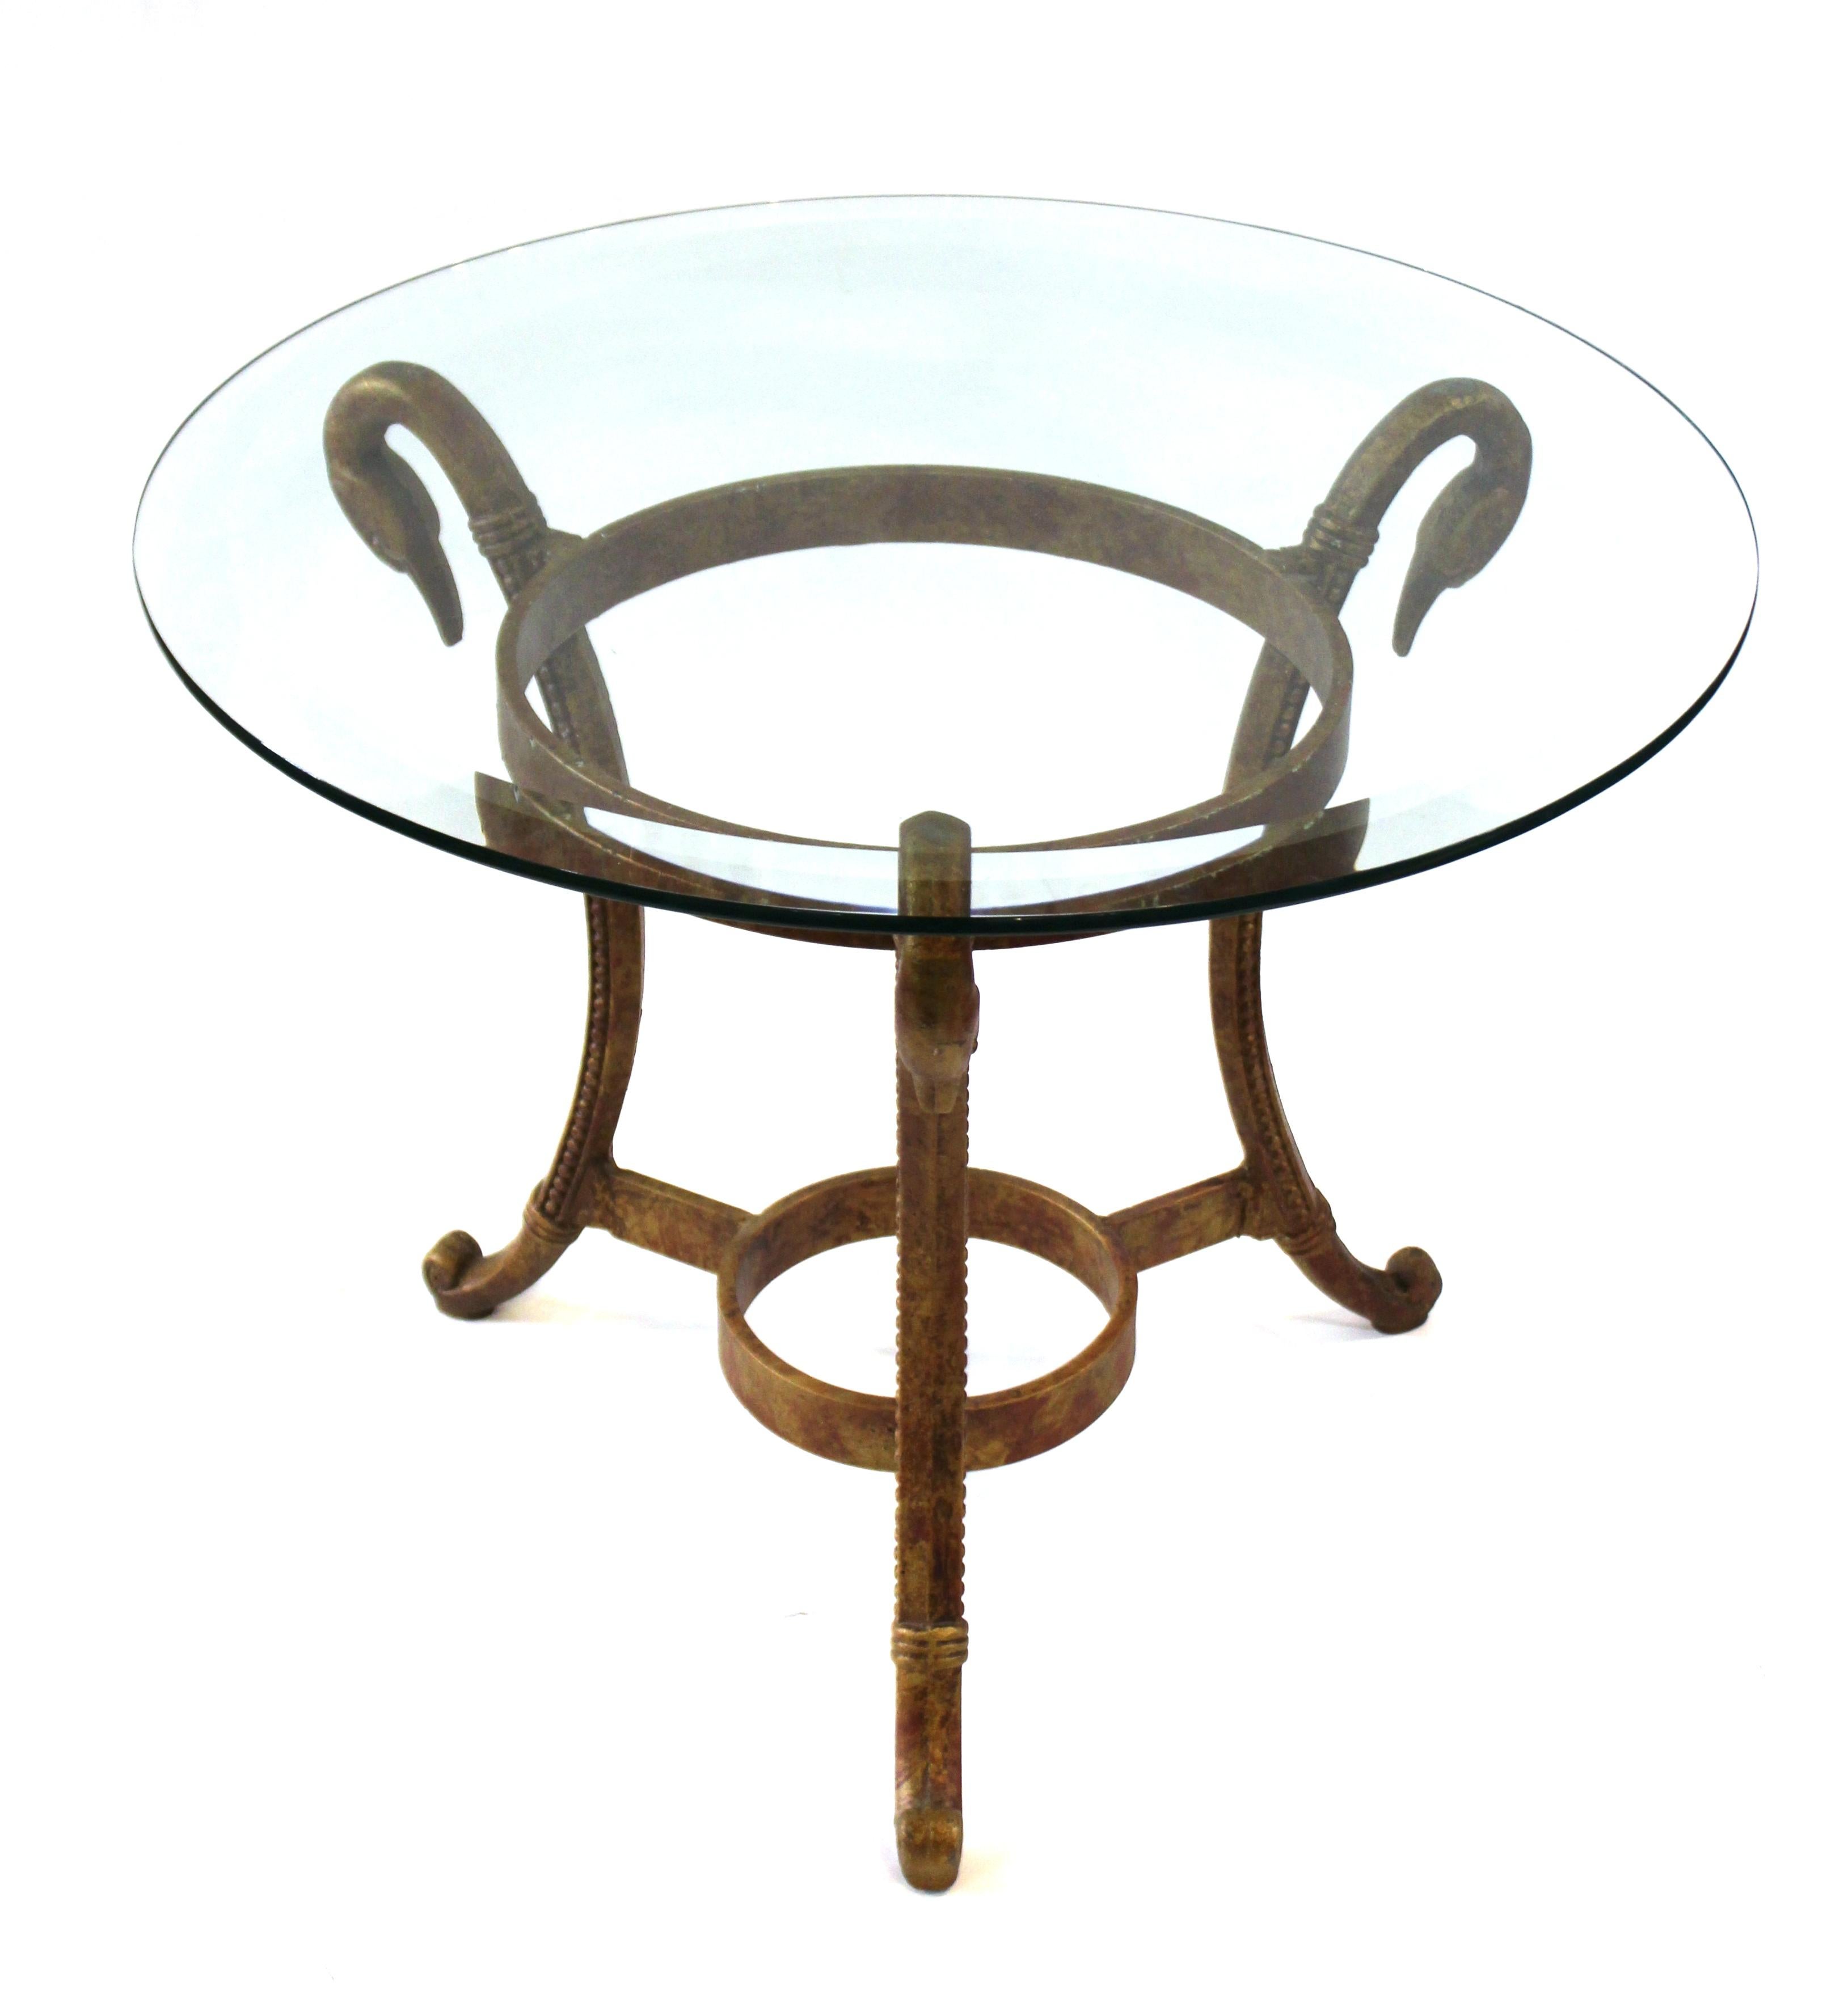 Hollywood Regency side table or center table with circular glass top. The piece has a gilt metal tripod base with decorative swan heads. In great vintage condition with age-appropriate wear and use.